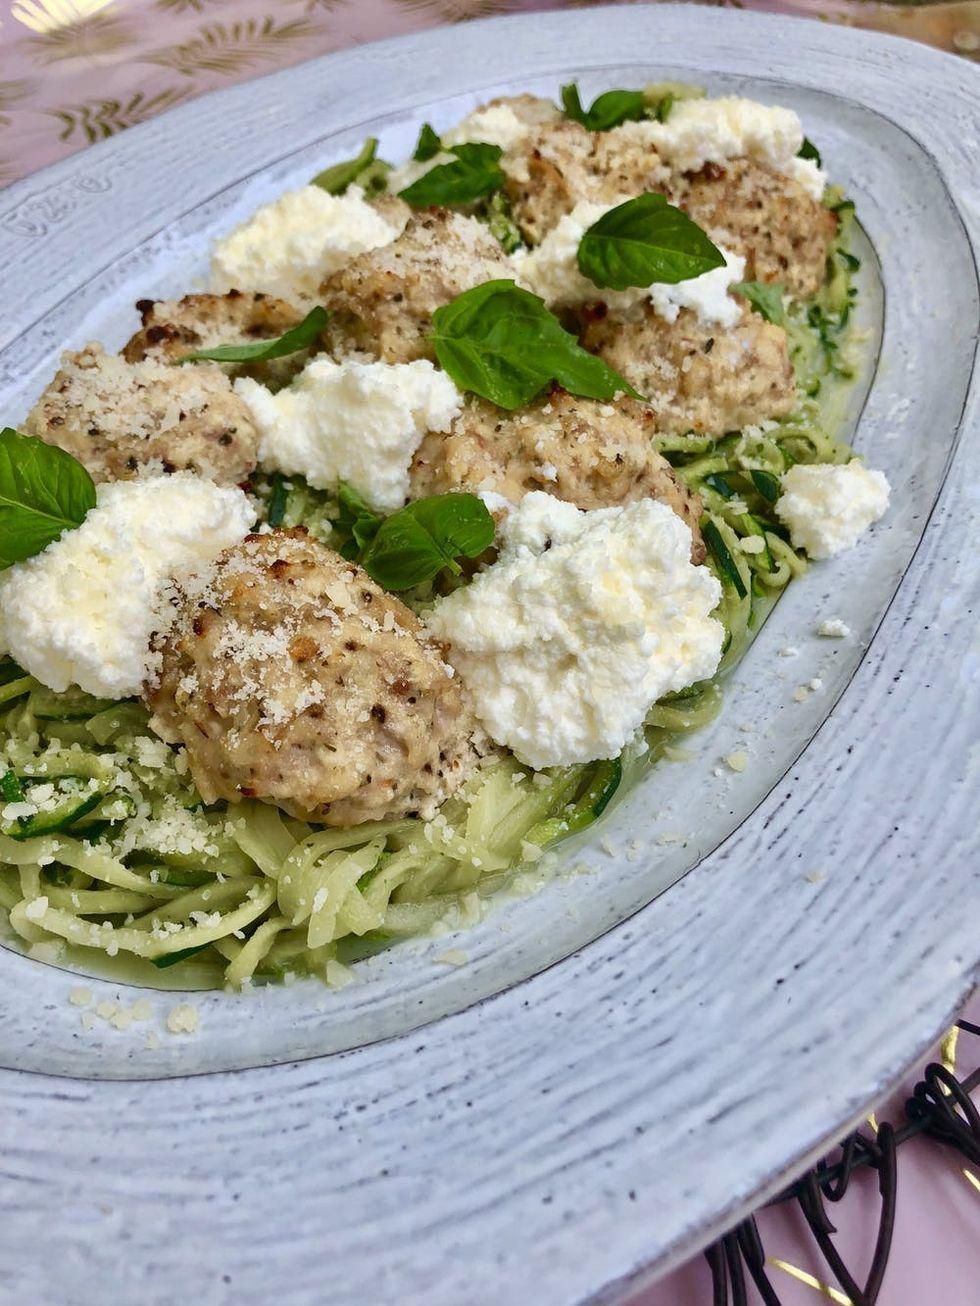 chicken meatballs and noodles made from zucchini healthy recipe